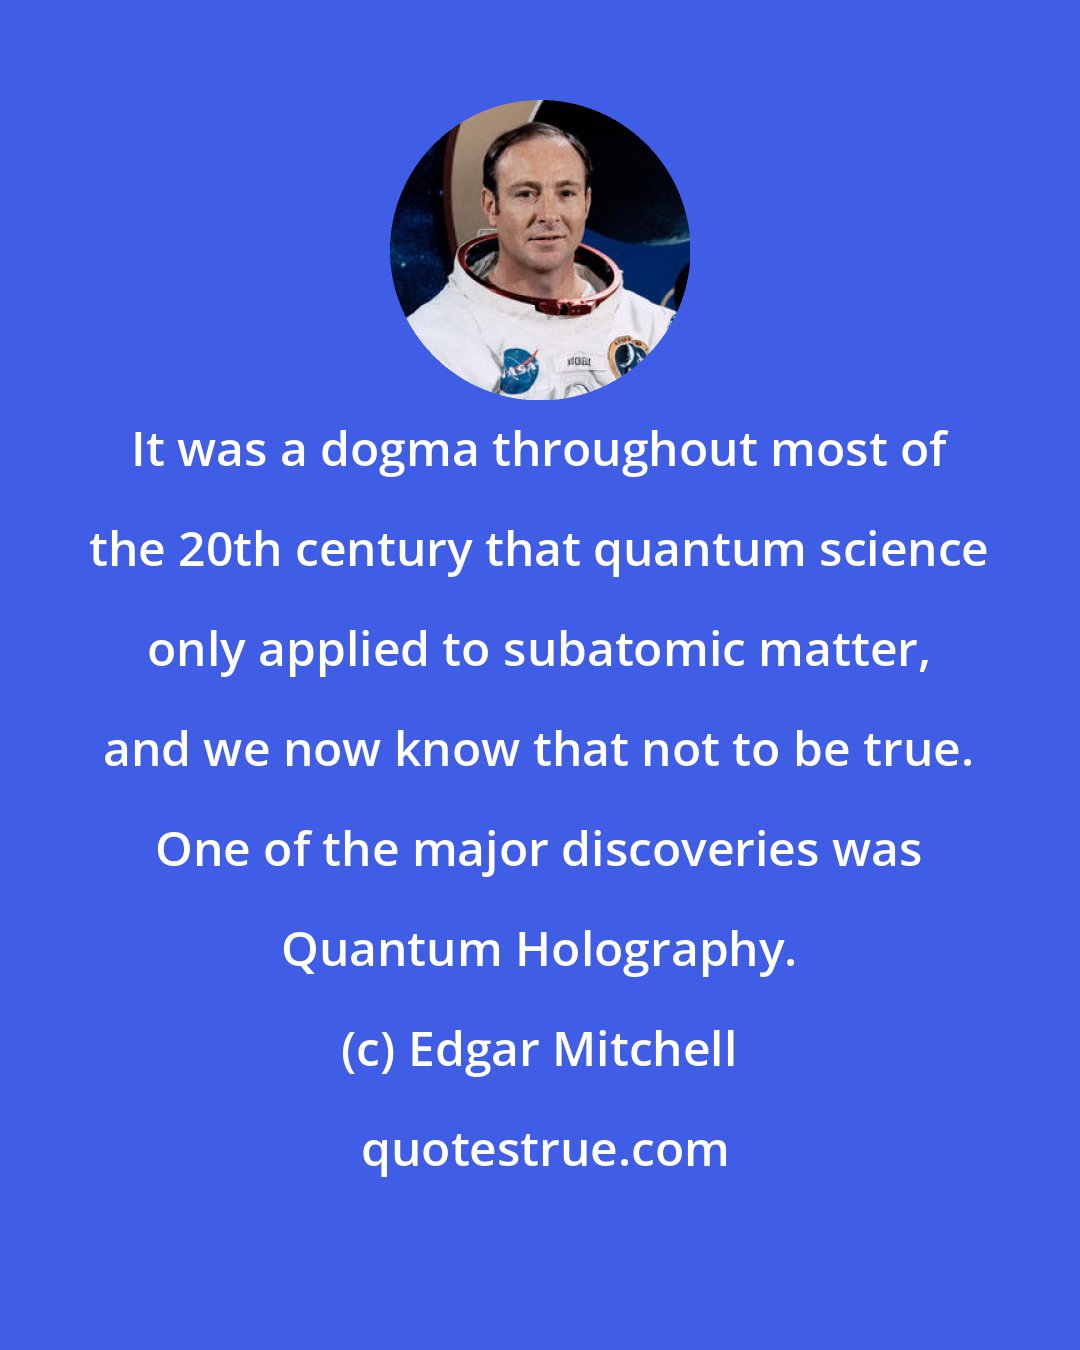 Edgar Mitchell: It was a dogma throughout most of the 20th century that quantum science only applied to subatomic matter, and we now know that not to be true. One of the major discoveries was Quantum Holography.